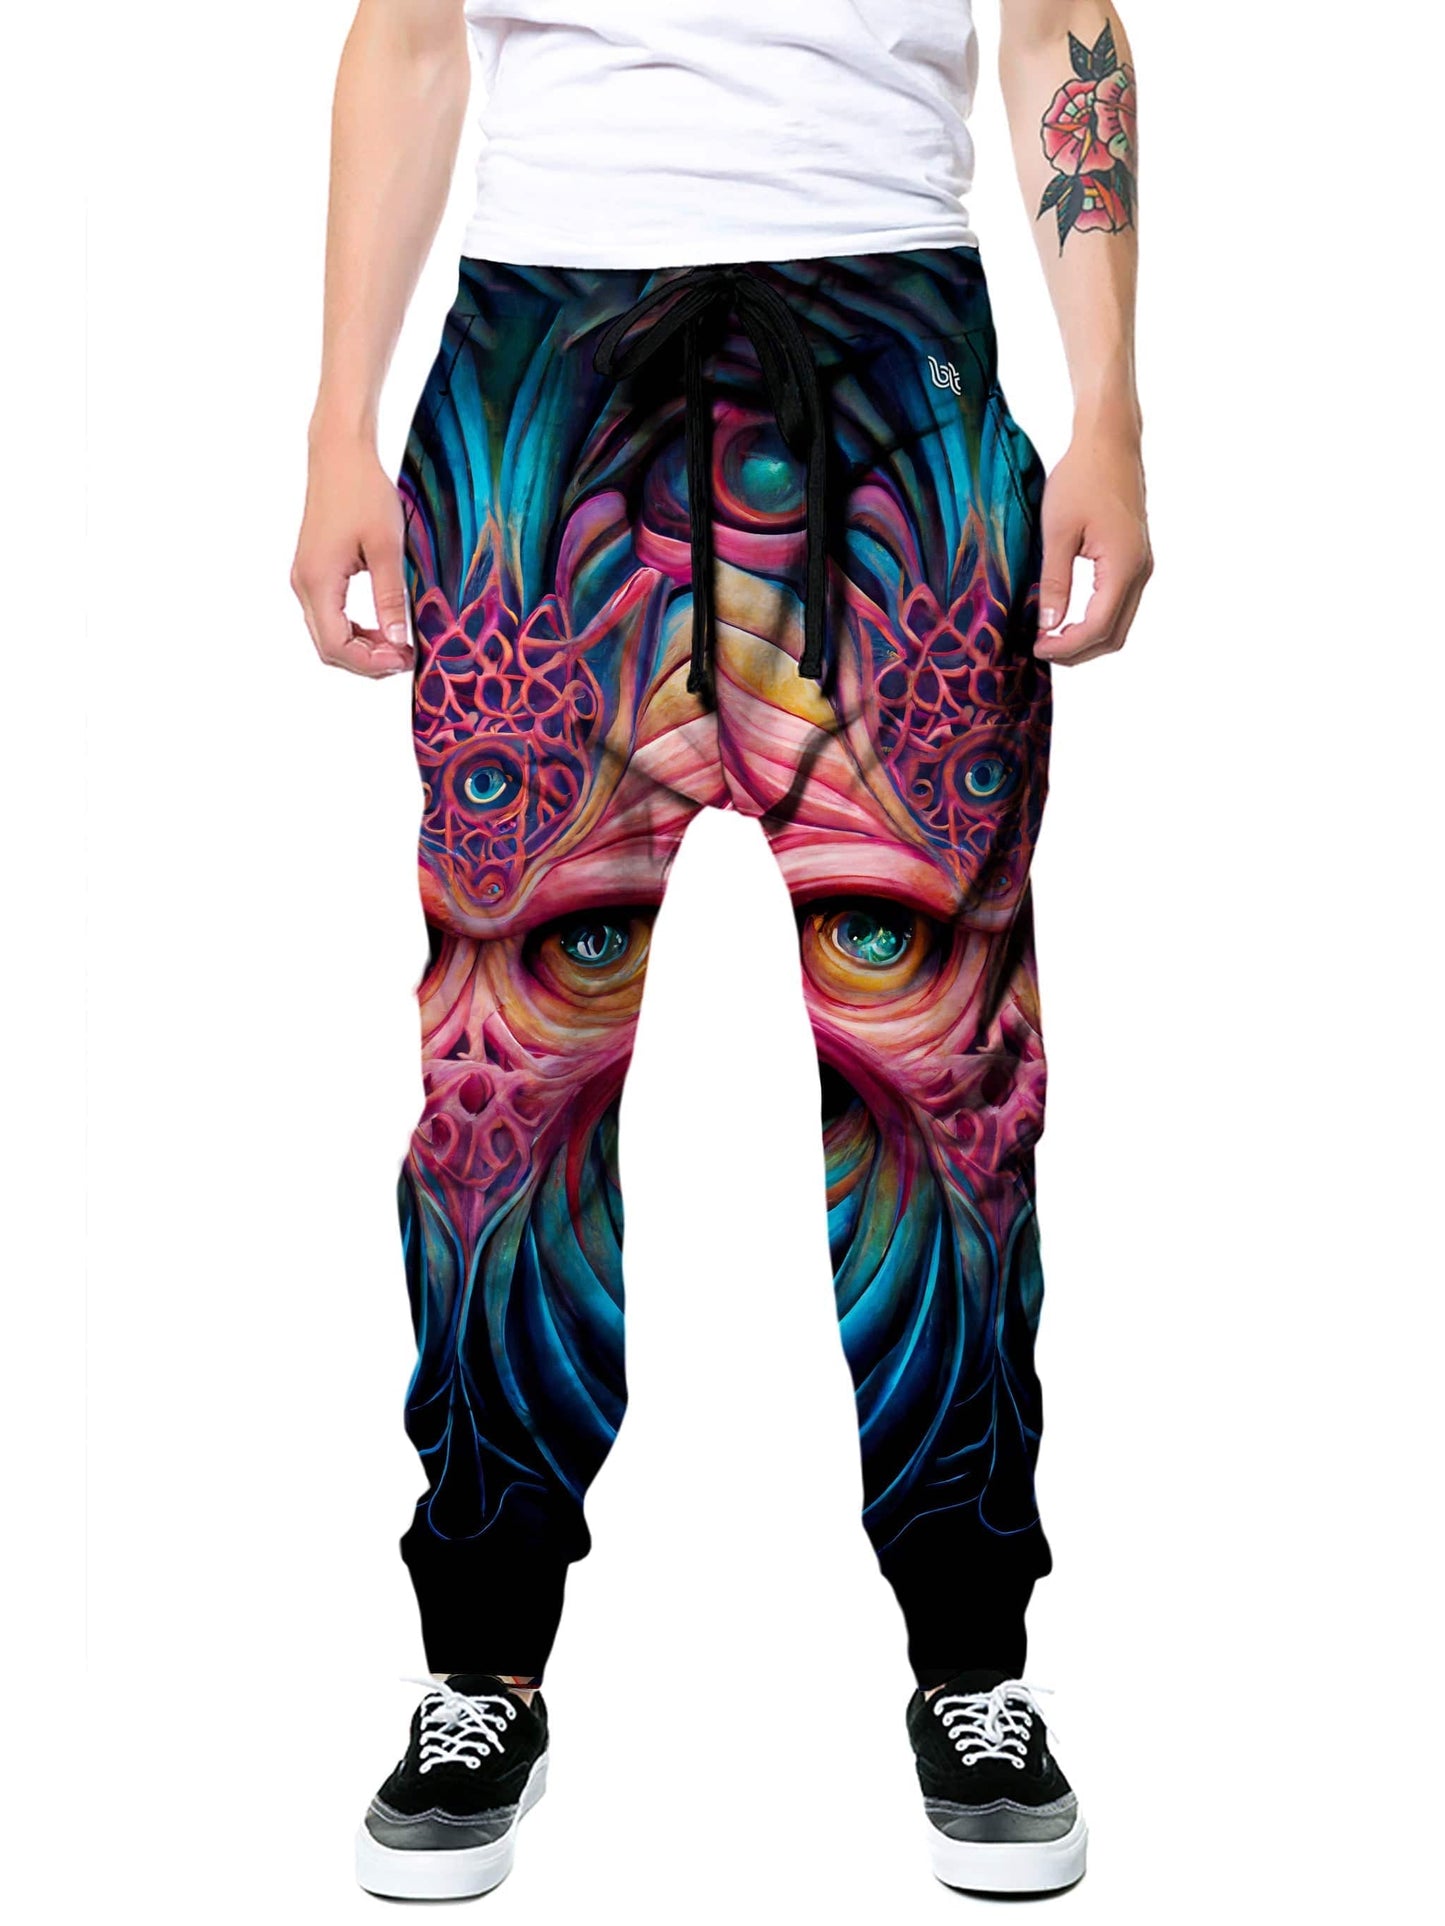 Unwelcome Consequence Joggers, Gratefully Dyed, | iEDM